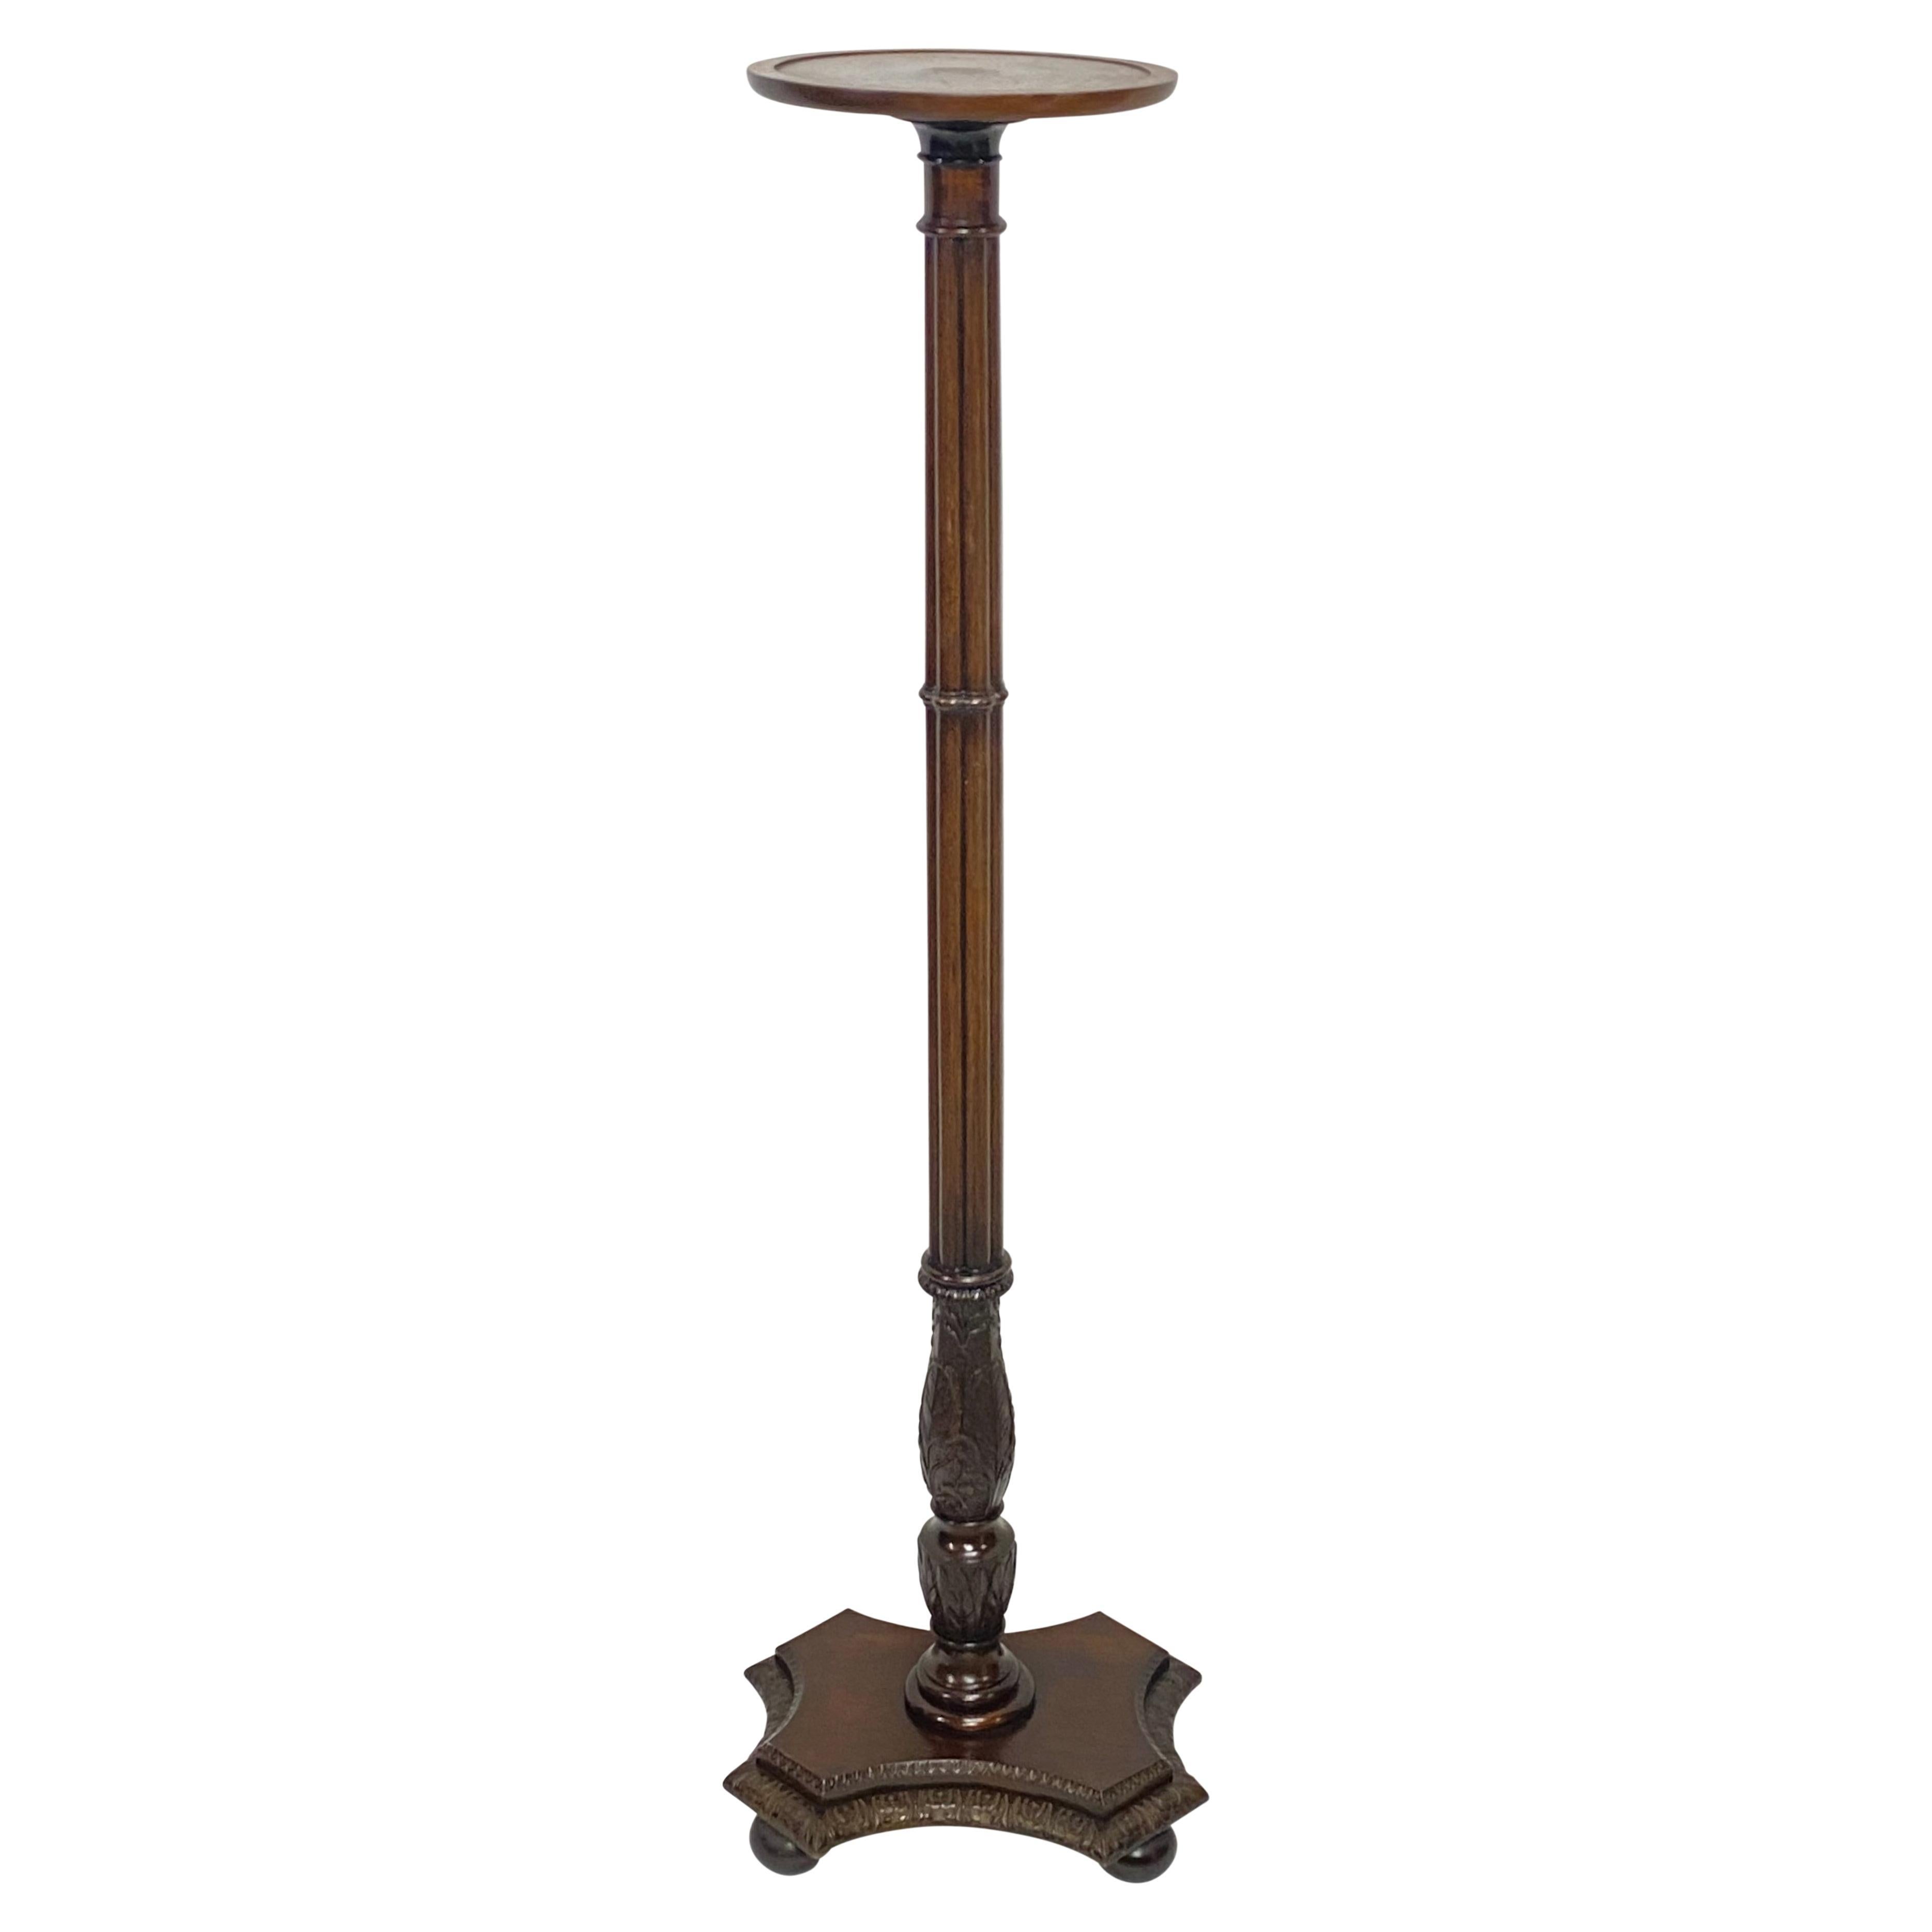 Tall English Georgian Mahogany Fern / Plant Stand, Late 18th-Early 19th Century For Sale